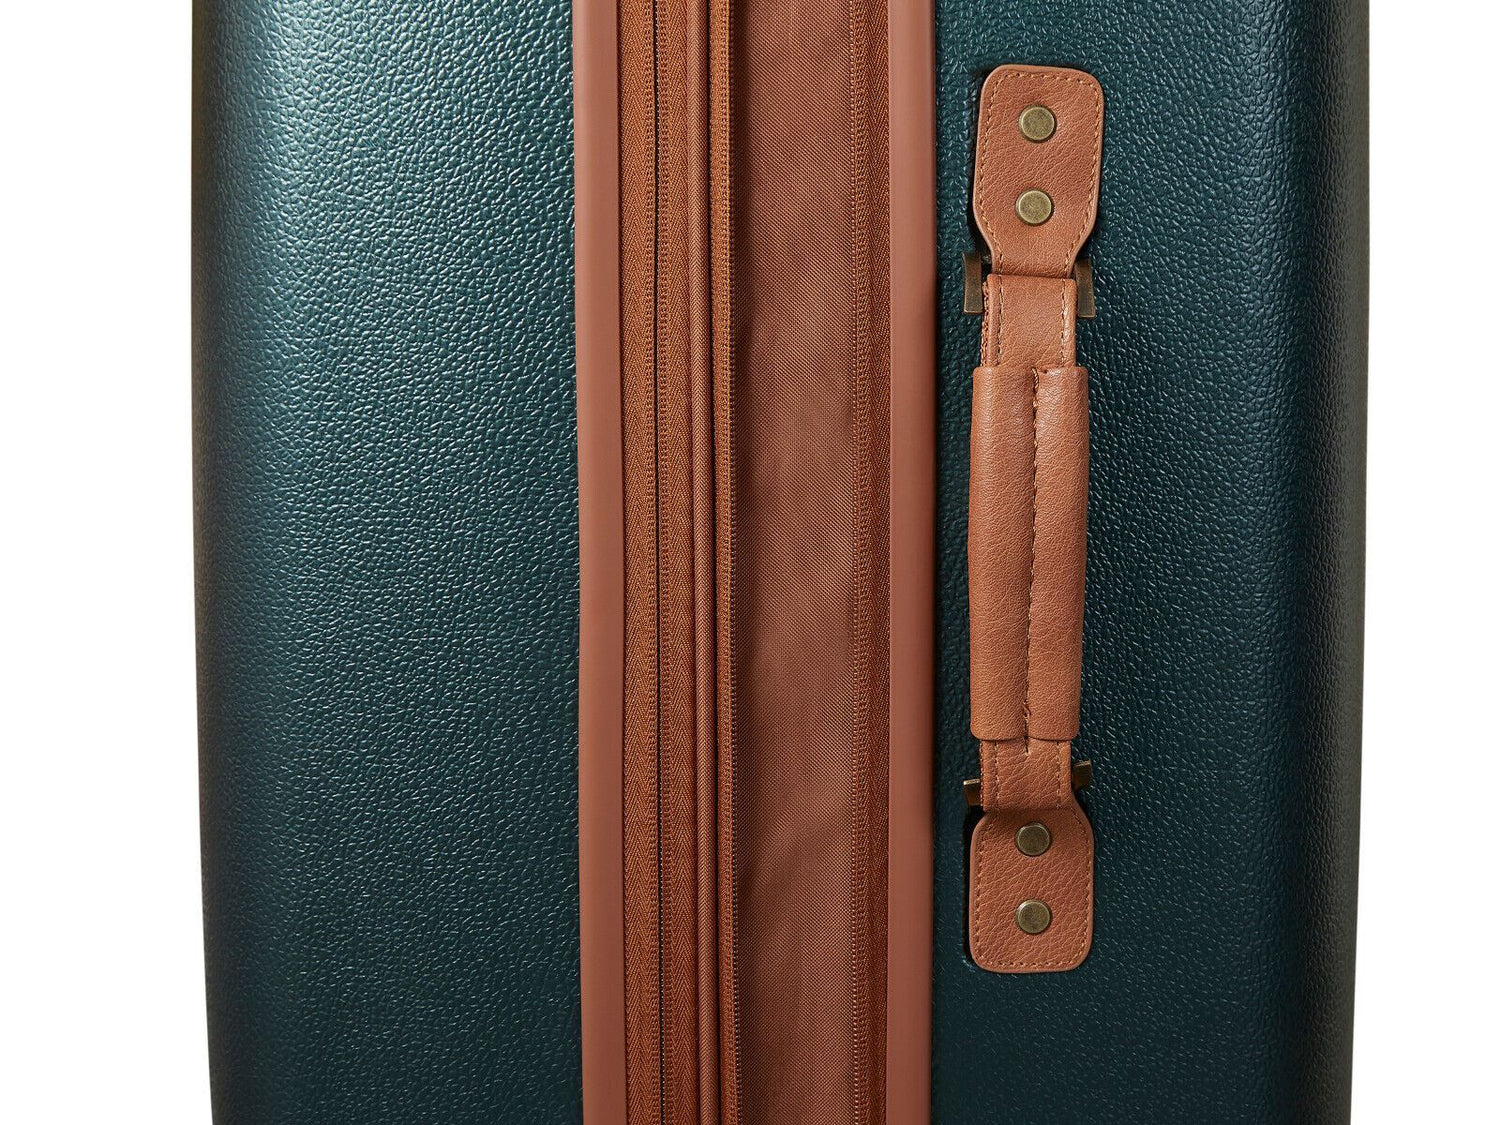 Anderson Medium Hard Shell Suitcase in Green